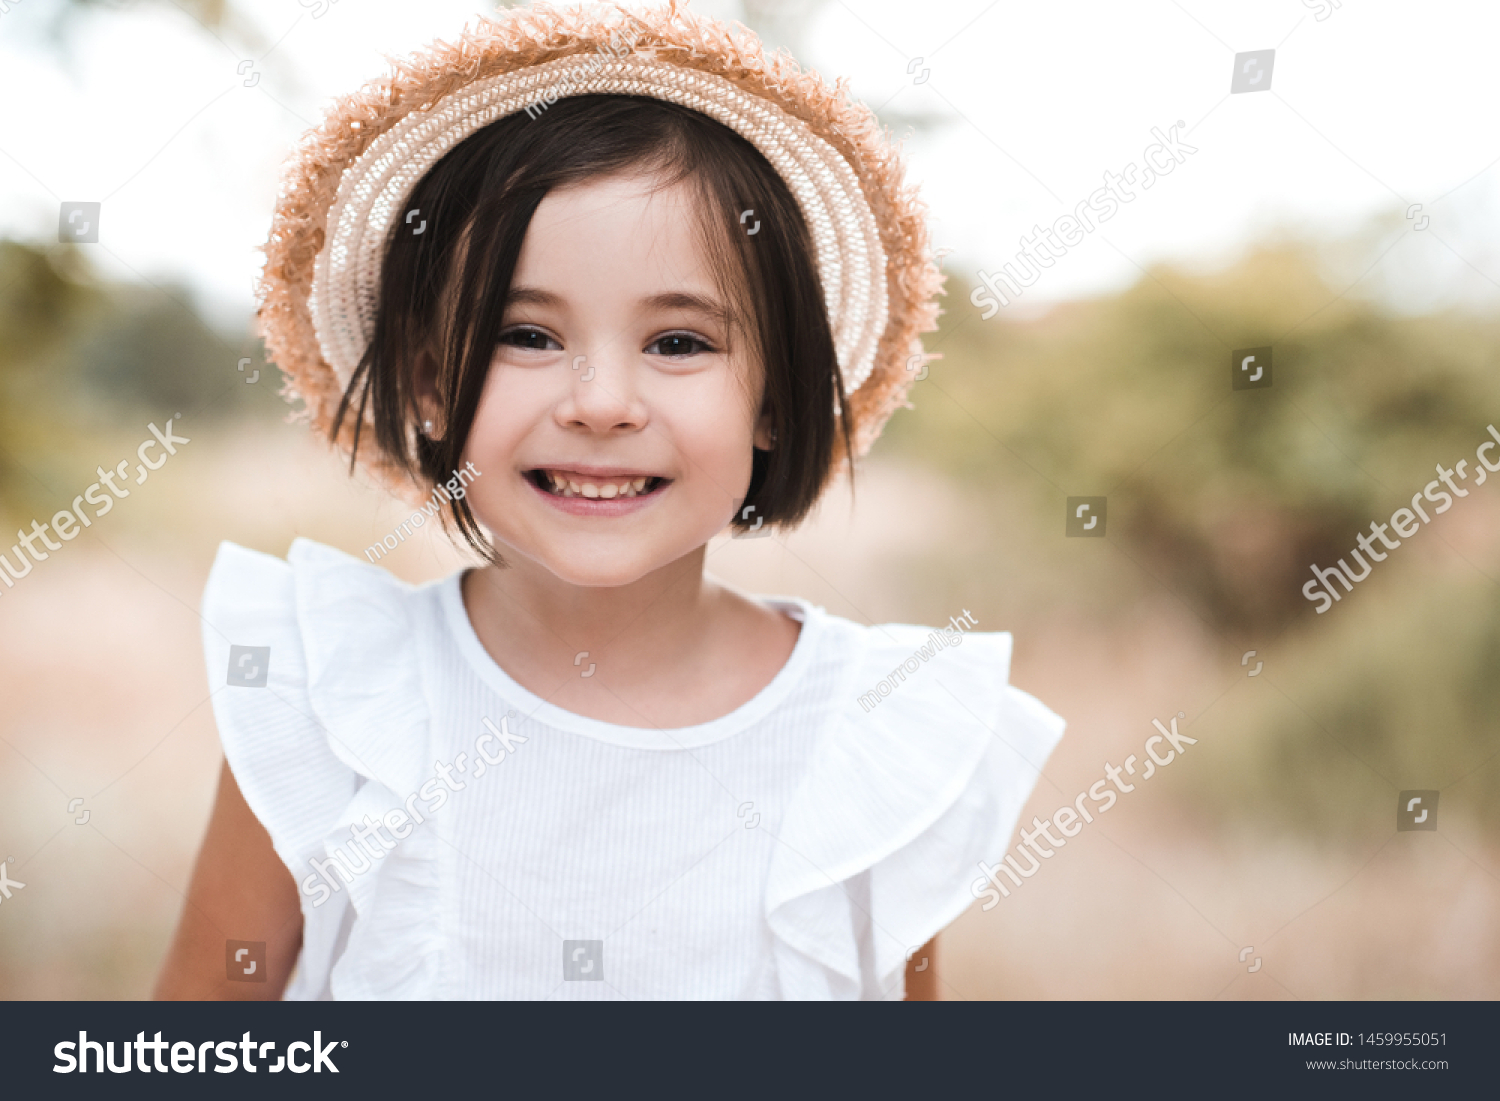 Smiling kid girl 3-4 year old wearing straw hat and white stylish shirt outdoors. Looking at camera.  #1459955051